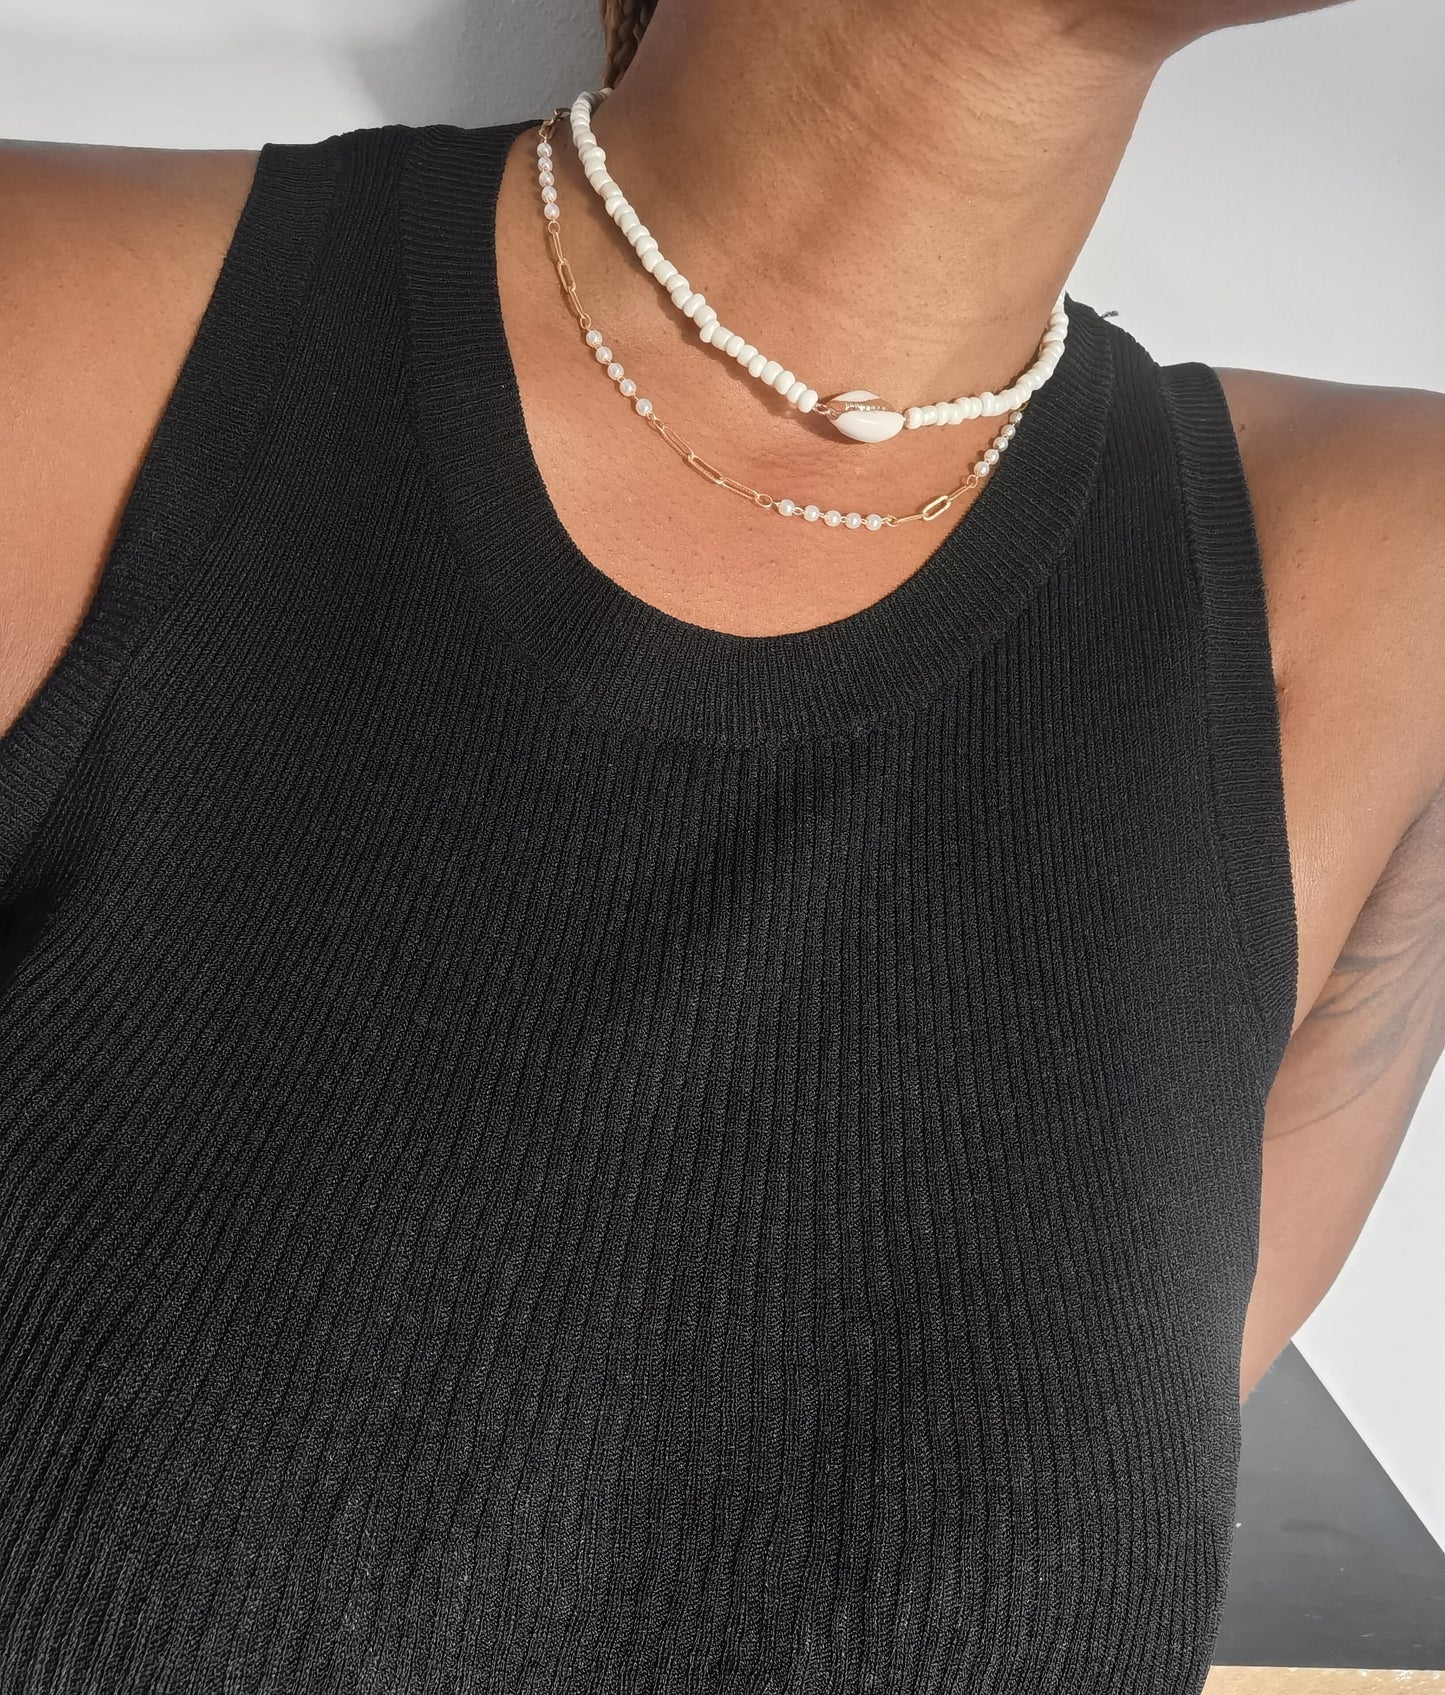 Chain necklace and pearl necklace set